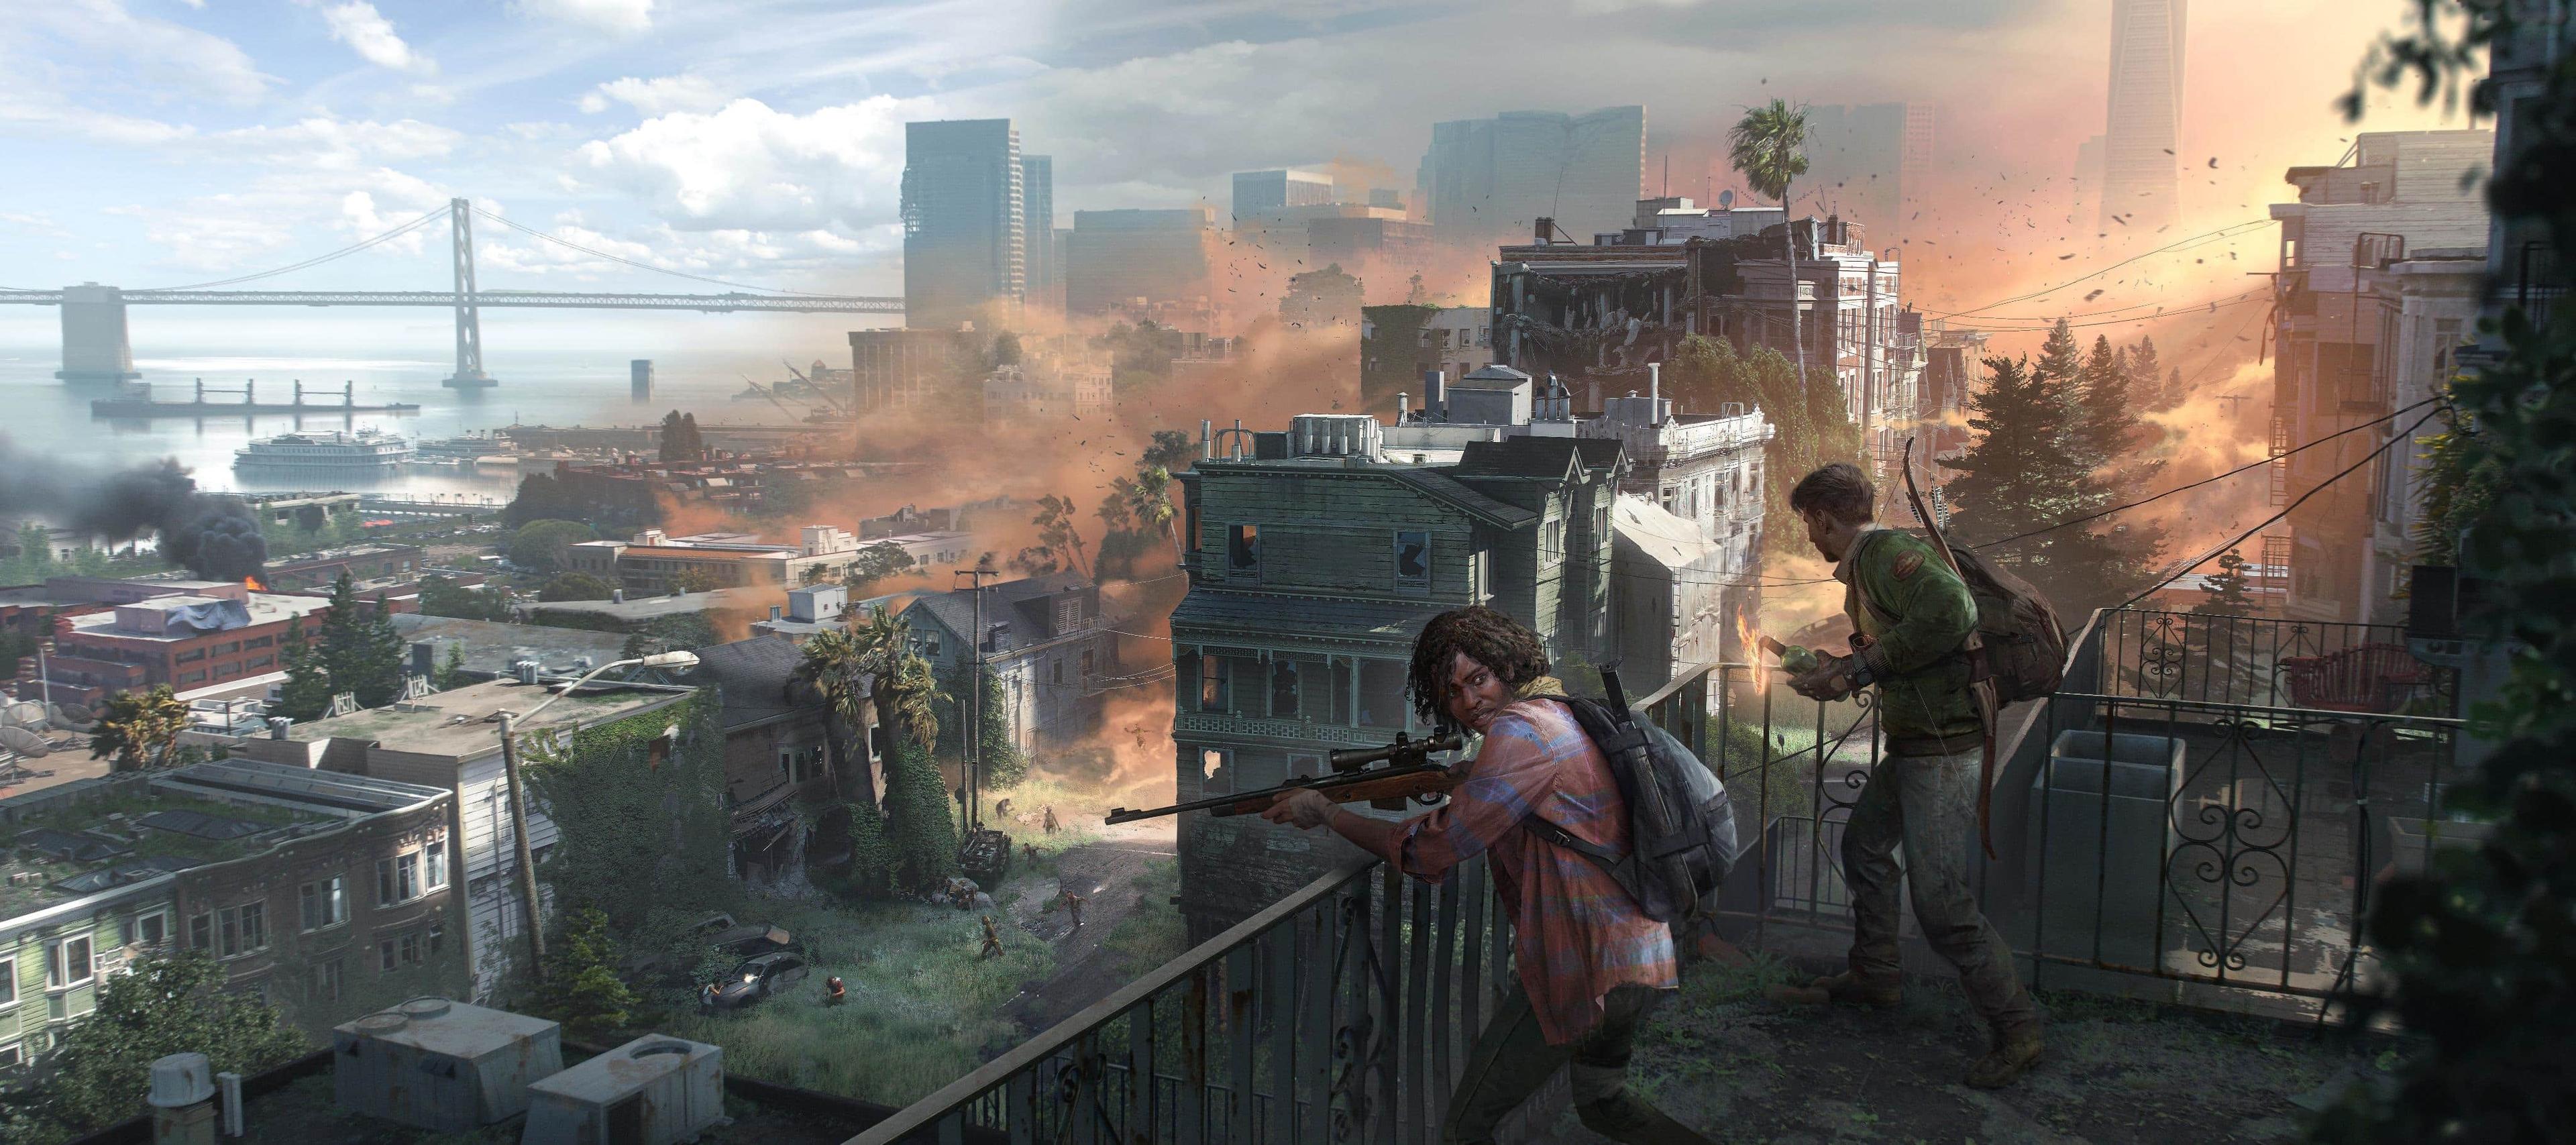 The Last of Us: Episode 5 Review - IGN